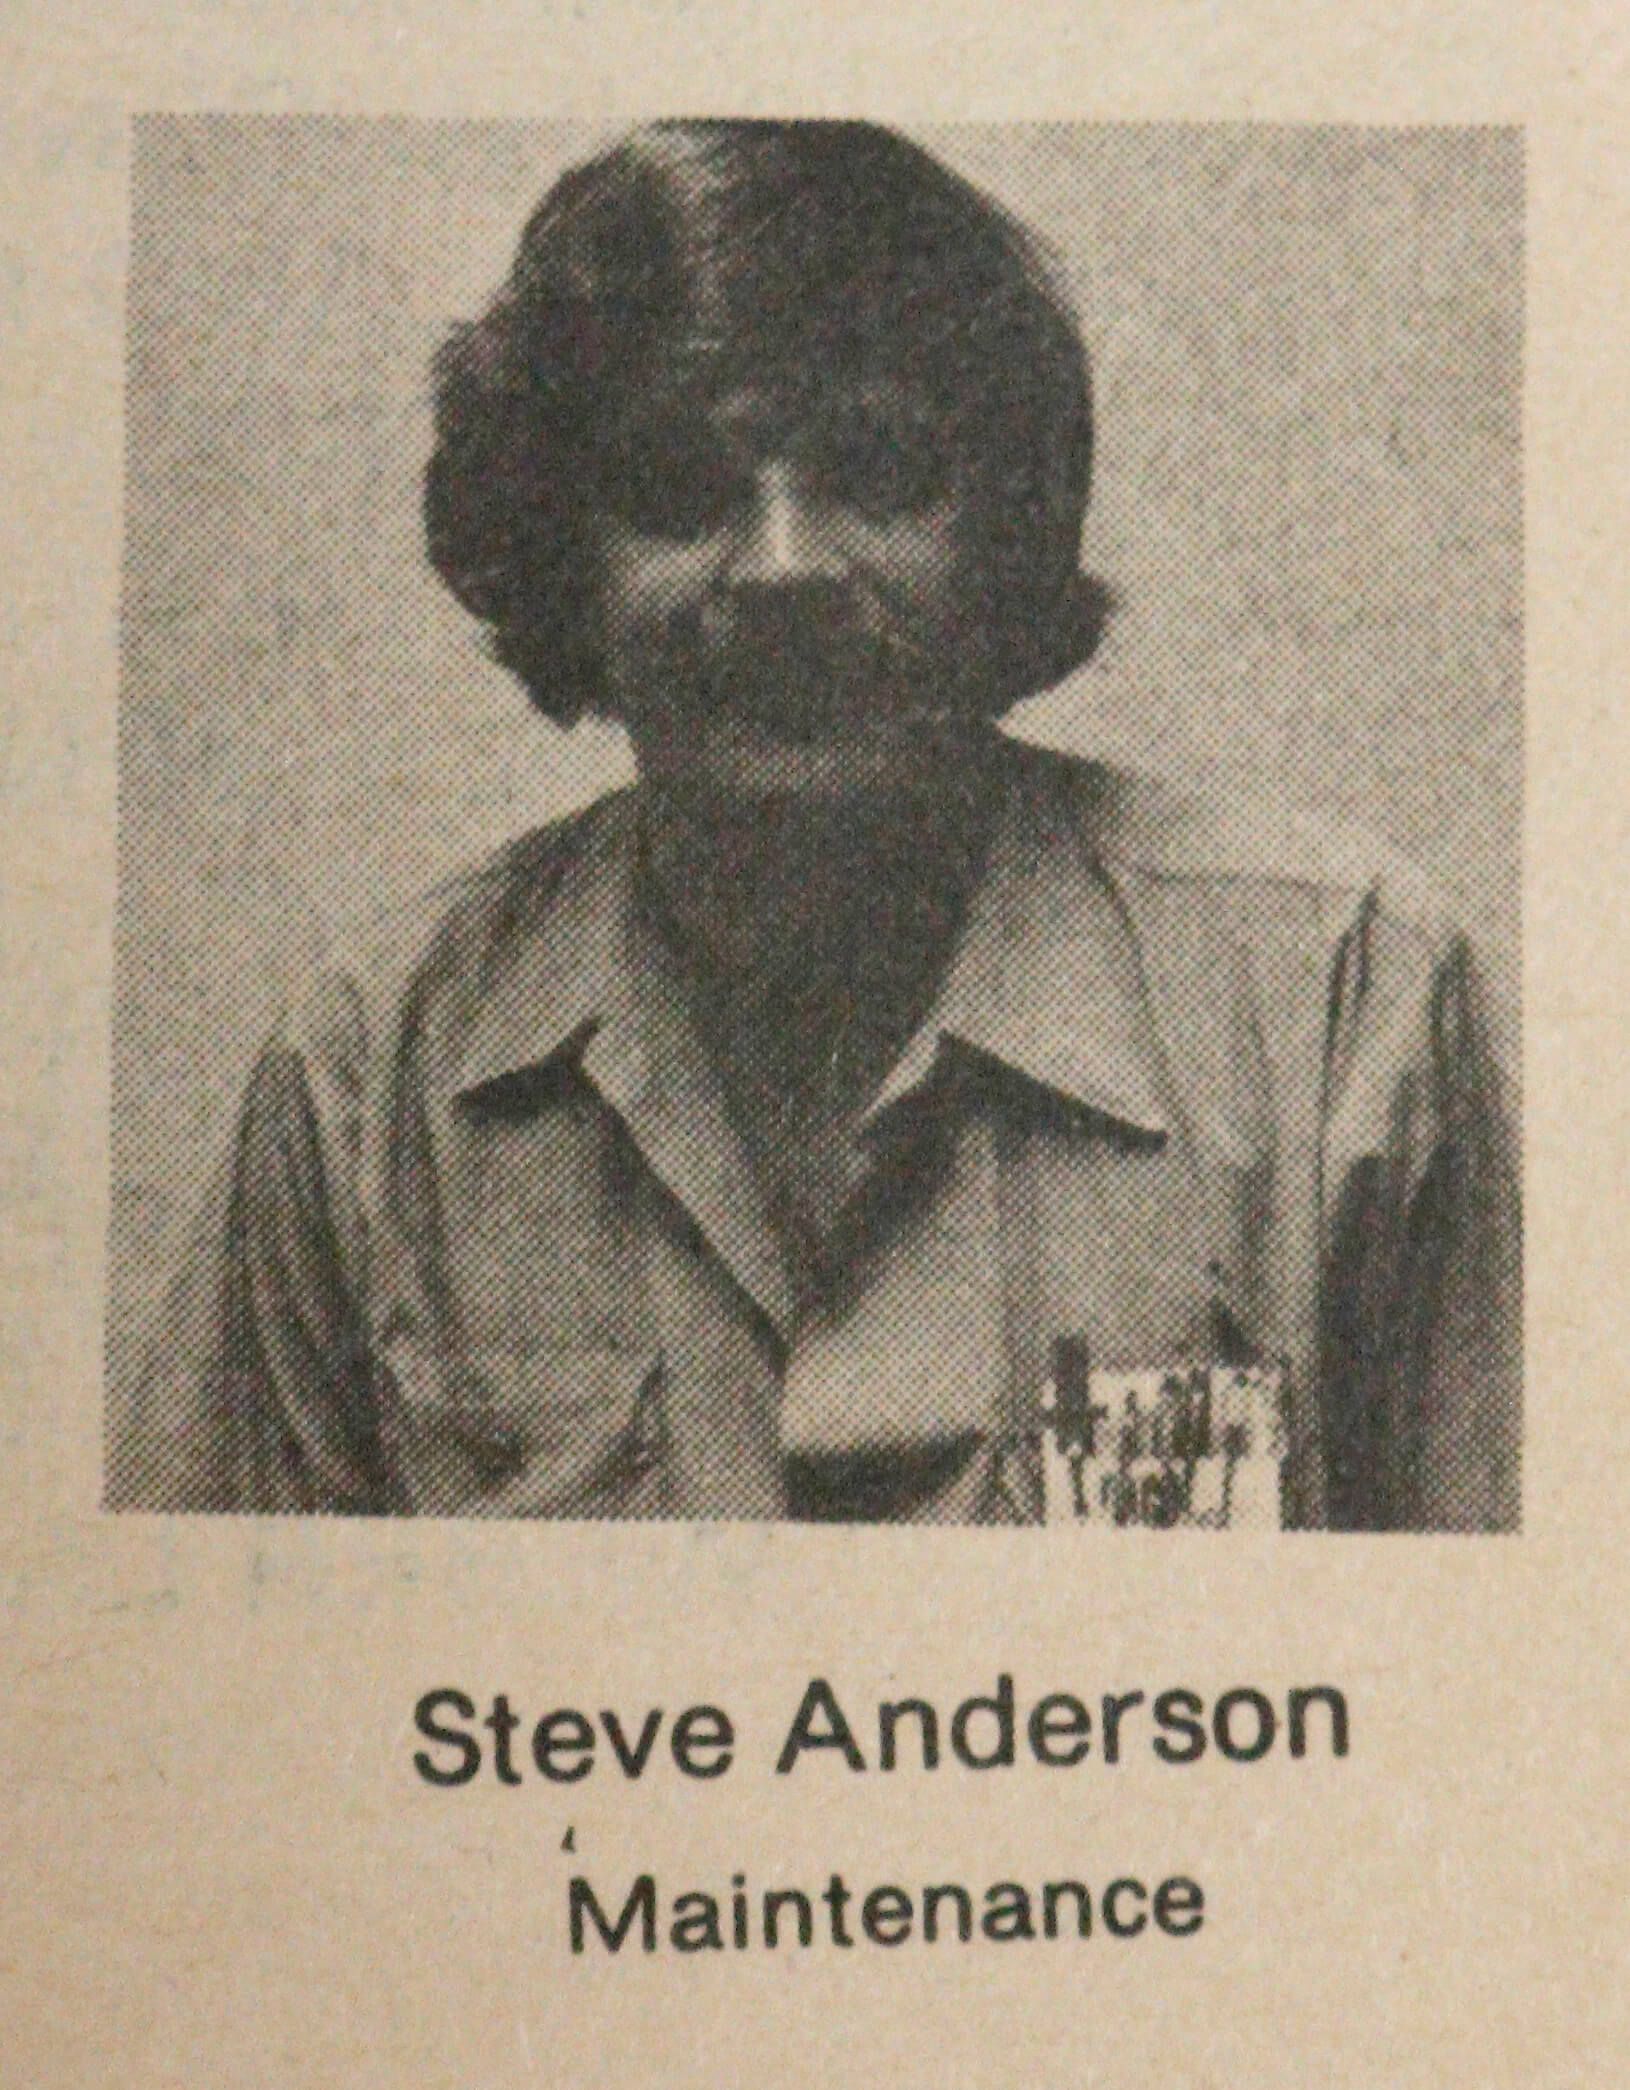 1980 photo of Steve Anderson Facilities Technician who has worked at Dura Supreme Cabinetry for 50 years.